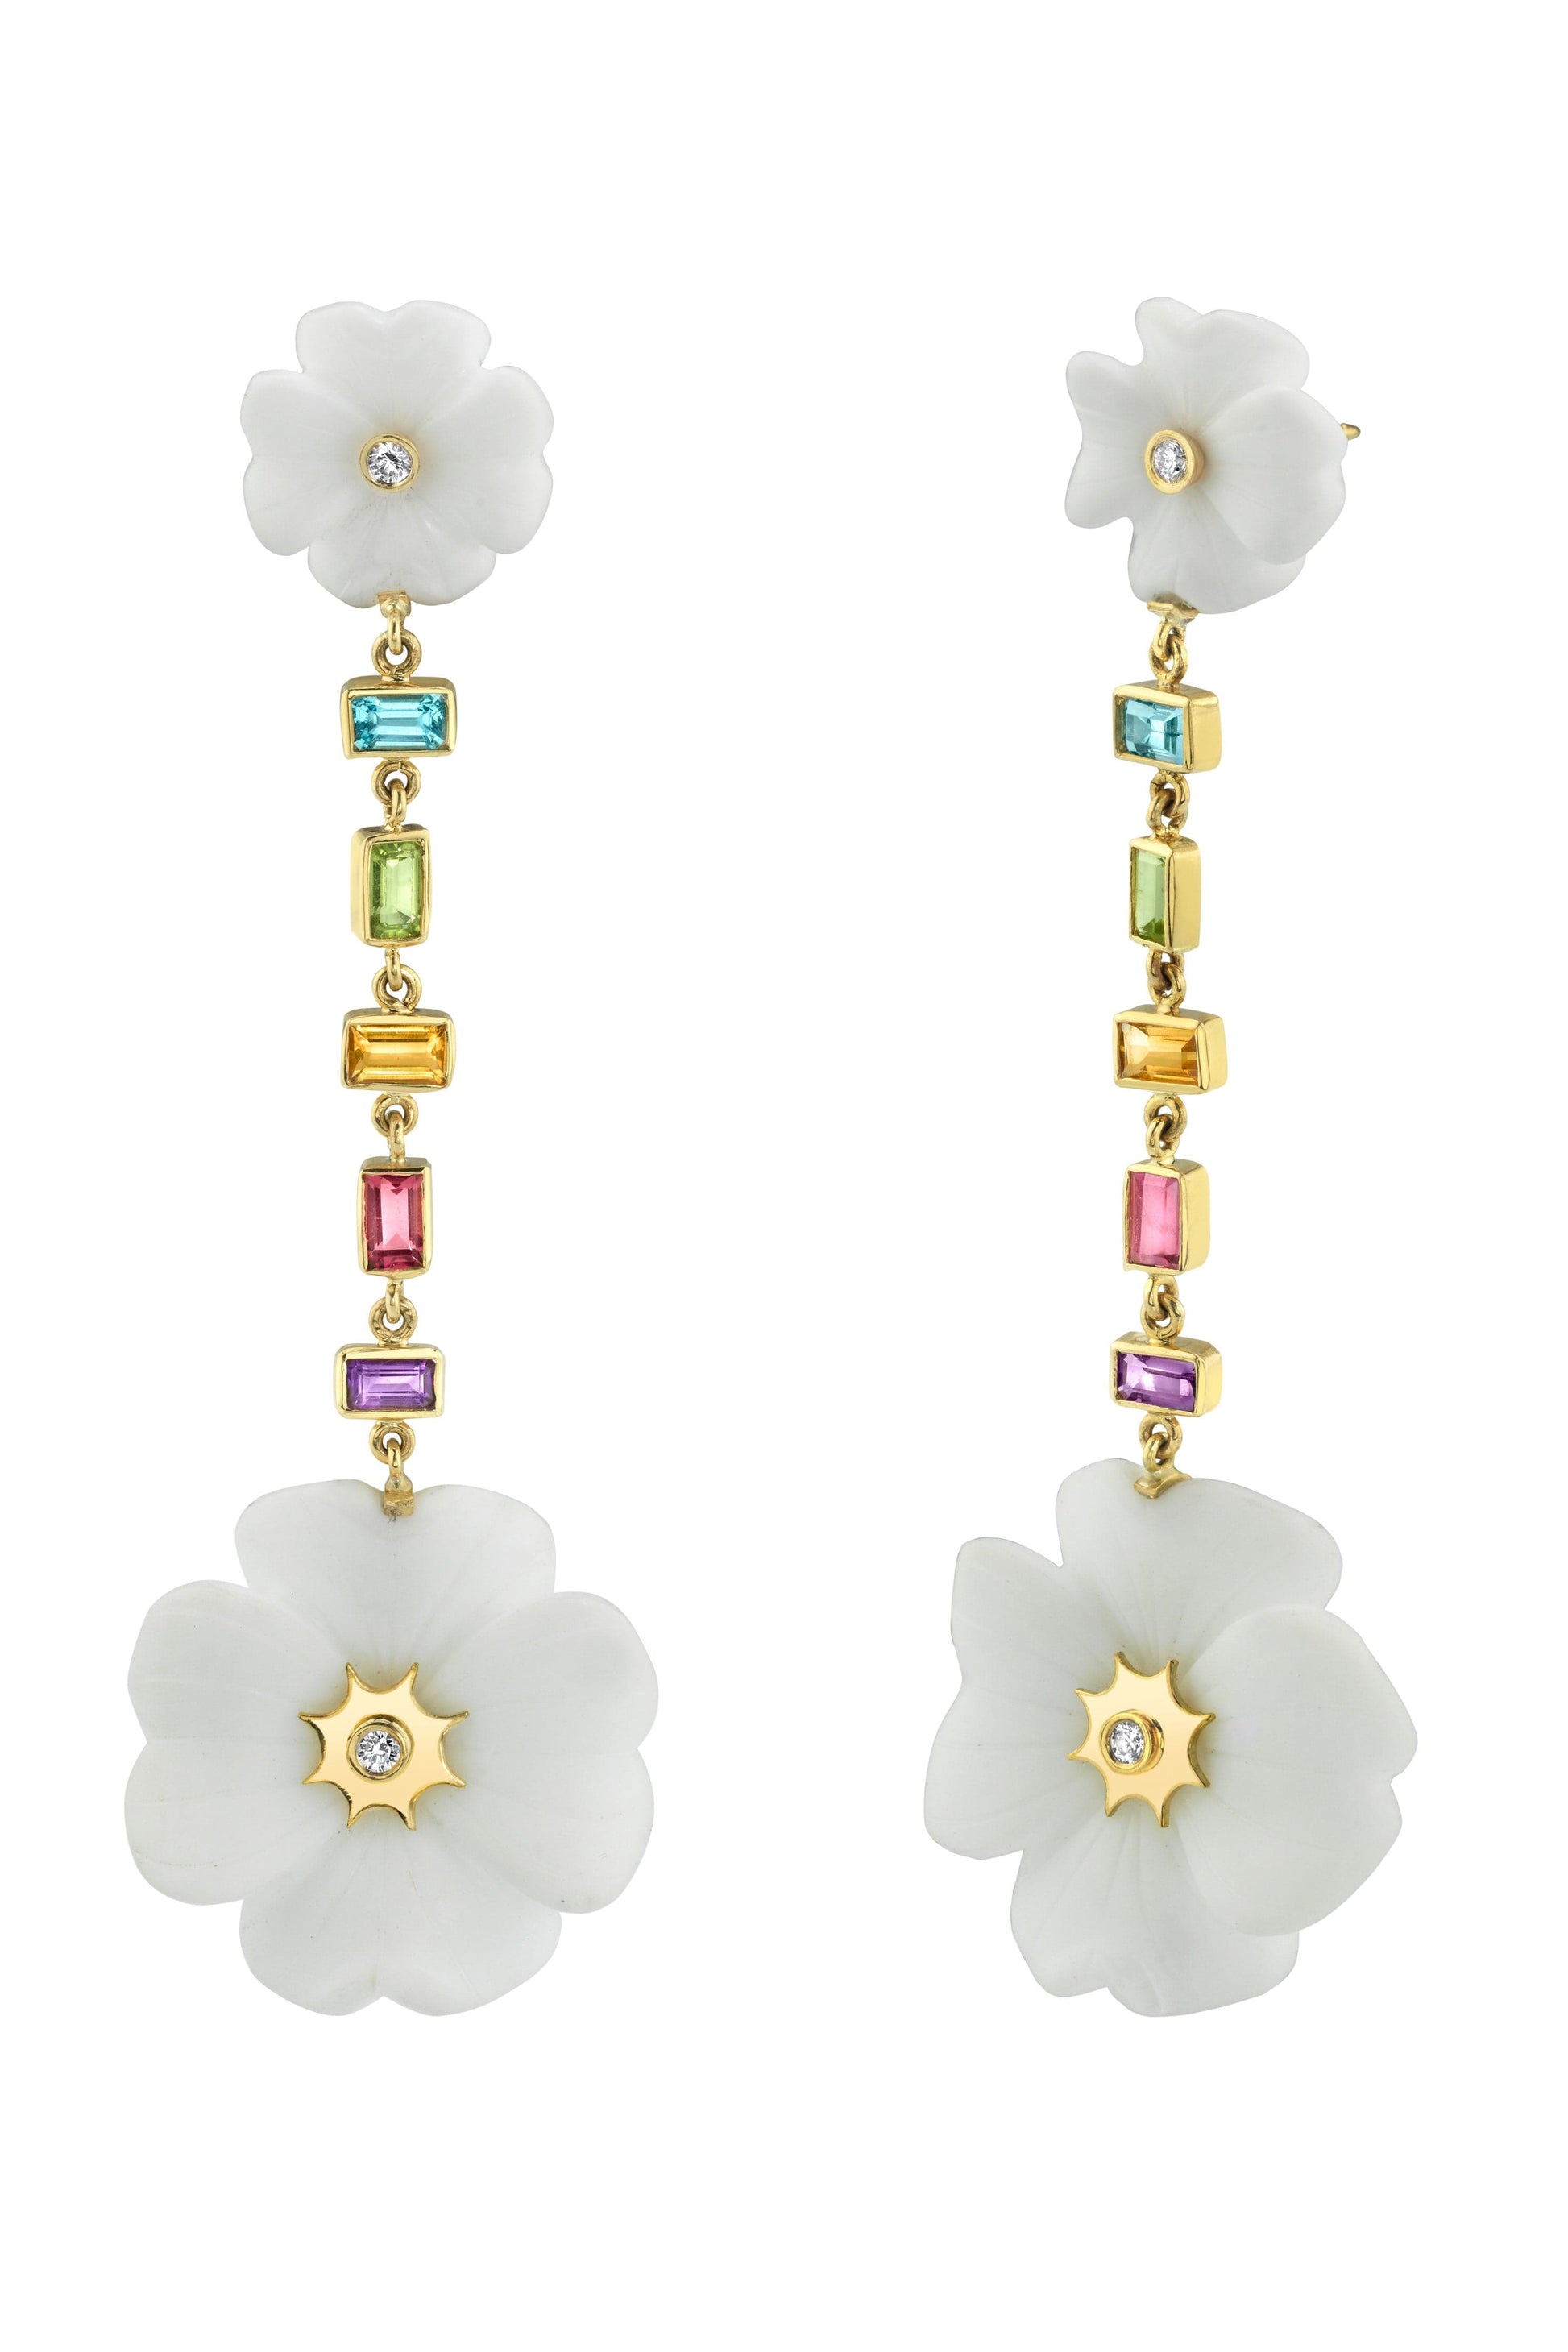 BRENT NEALE-White Agate Double Clover Drop Earrings-YELLOW GOLD